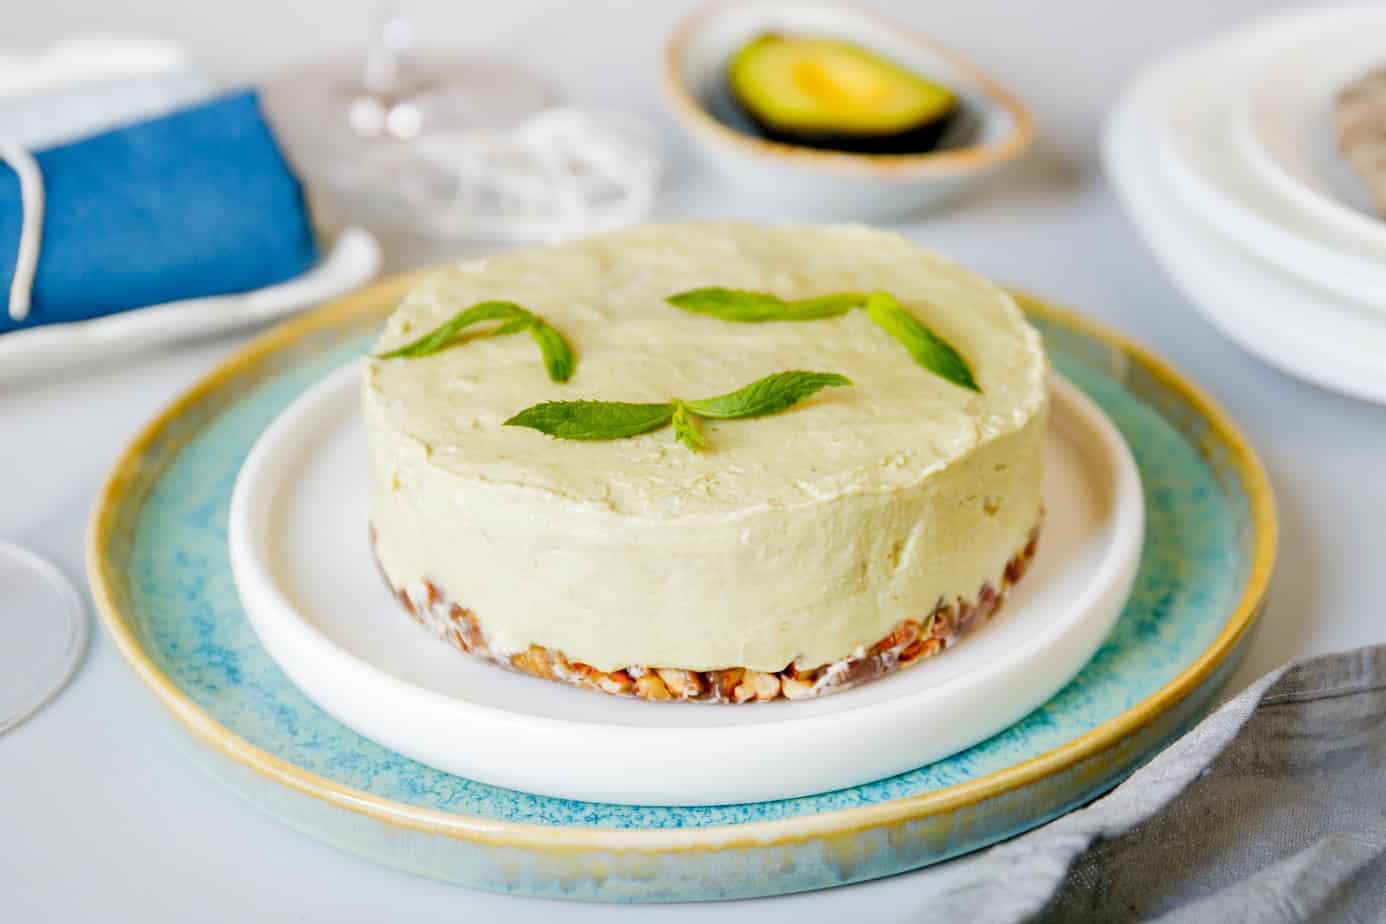 The completed avocado cheesecake.